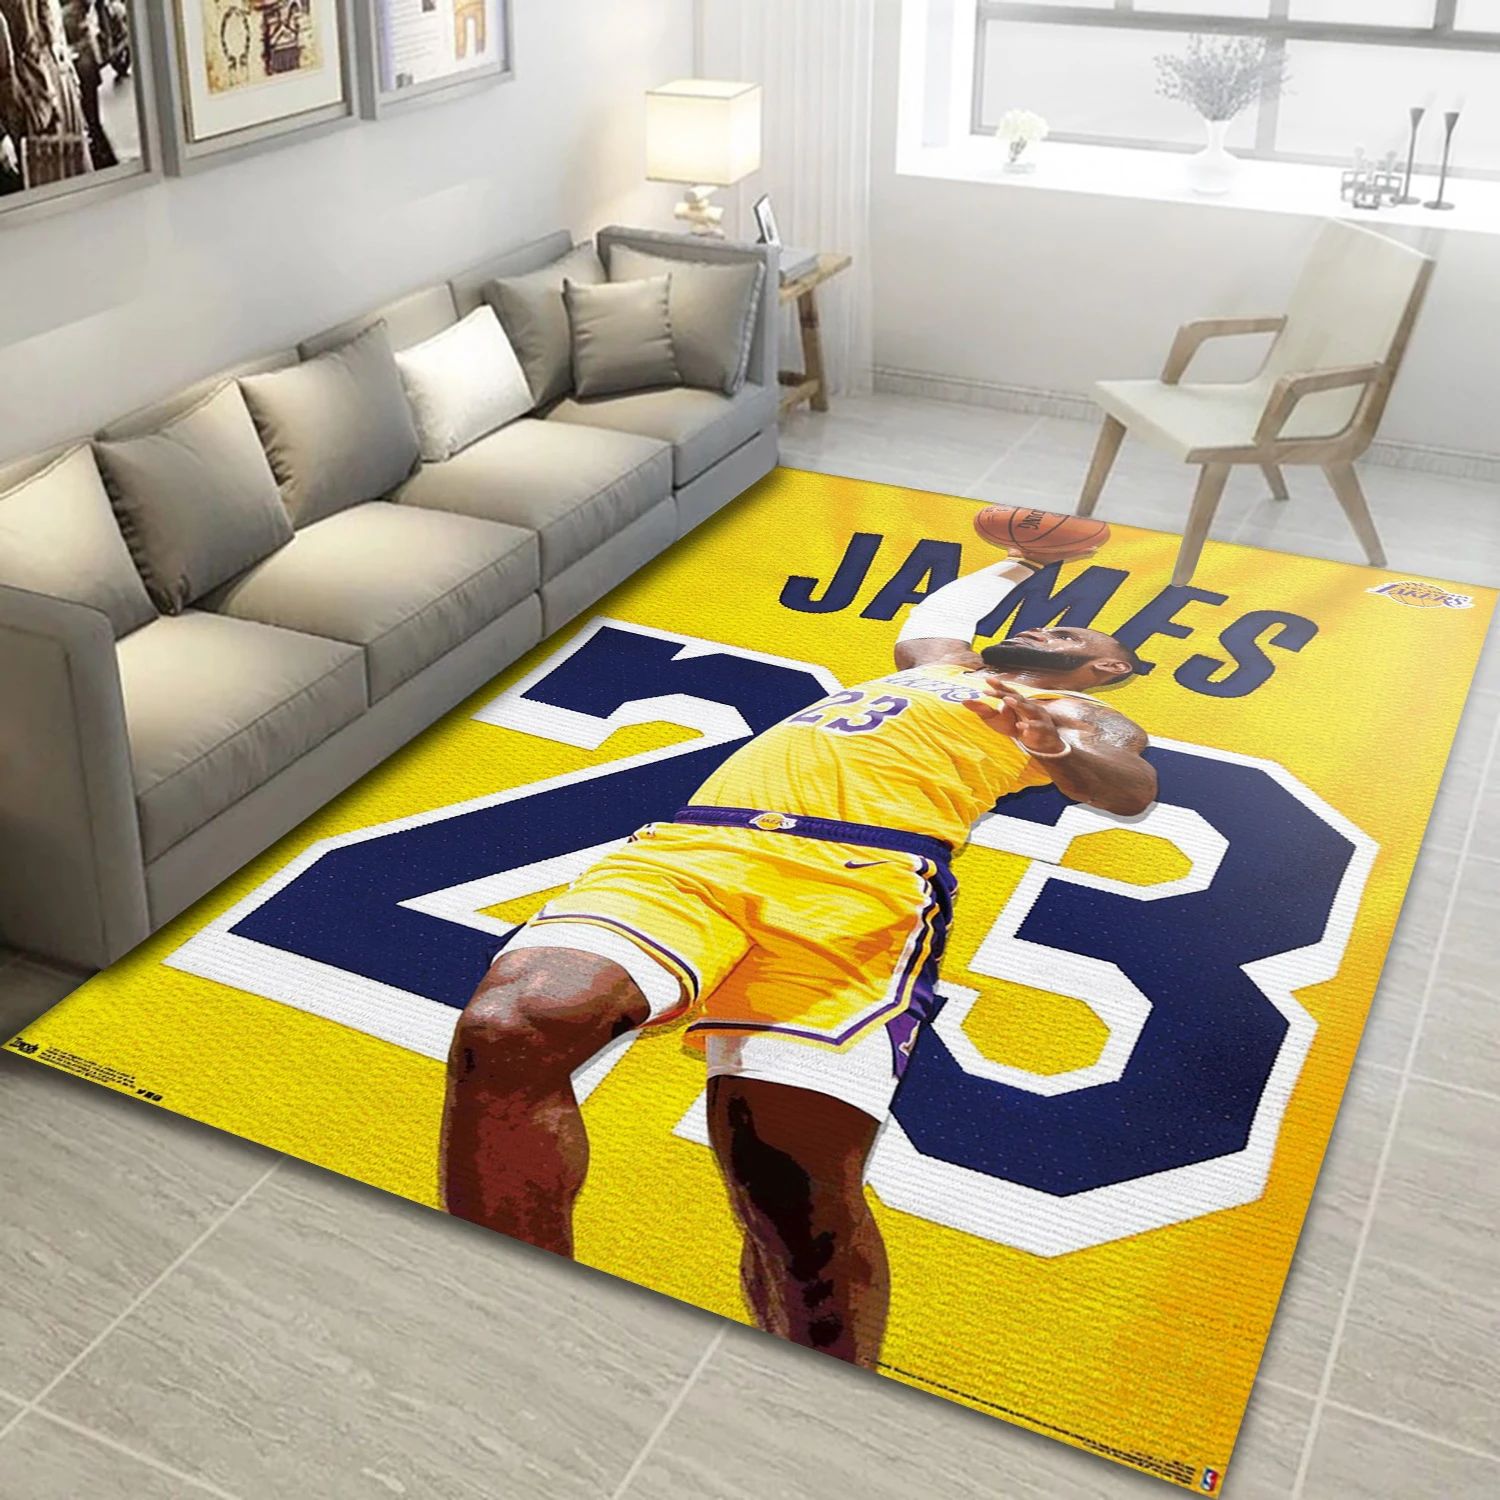 Lebron James Los Angeles Lakers NBA Area Rug For Christmas, Living Room Rug - Room Decor - Indoor Outdoor Rugs